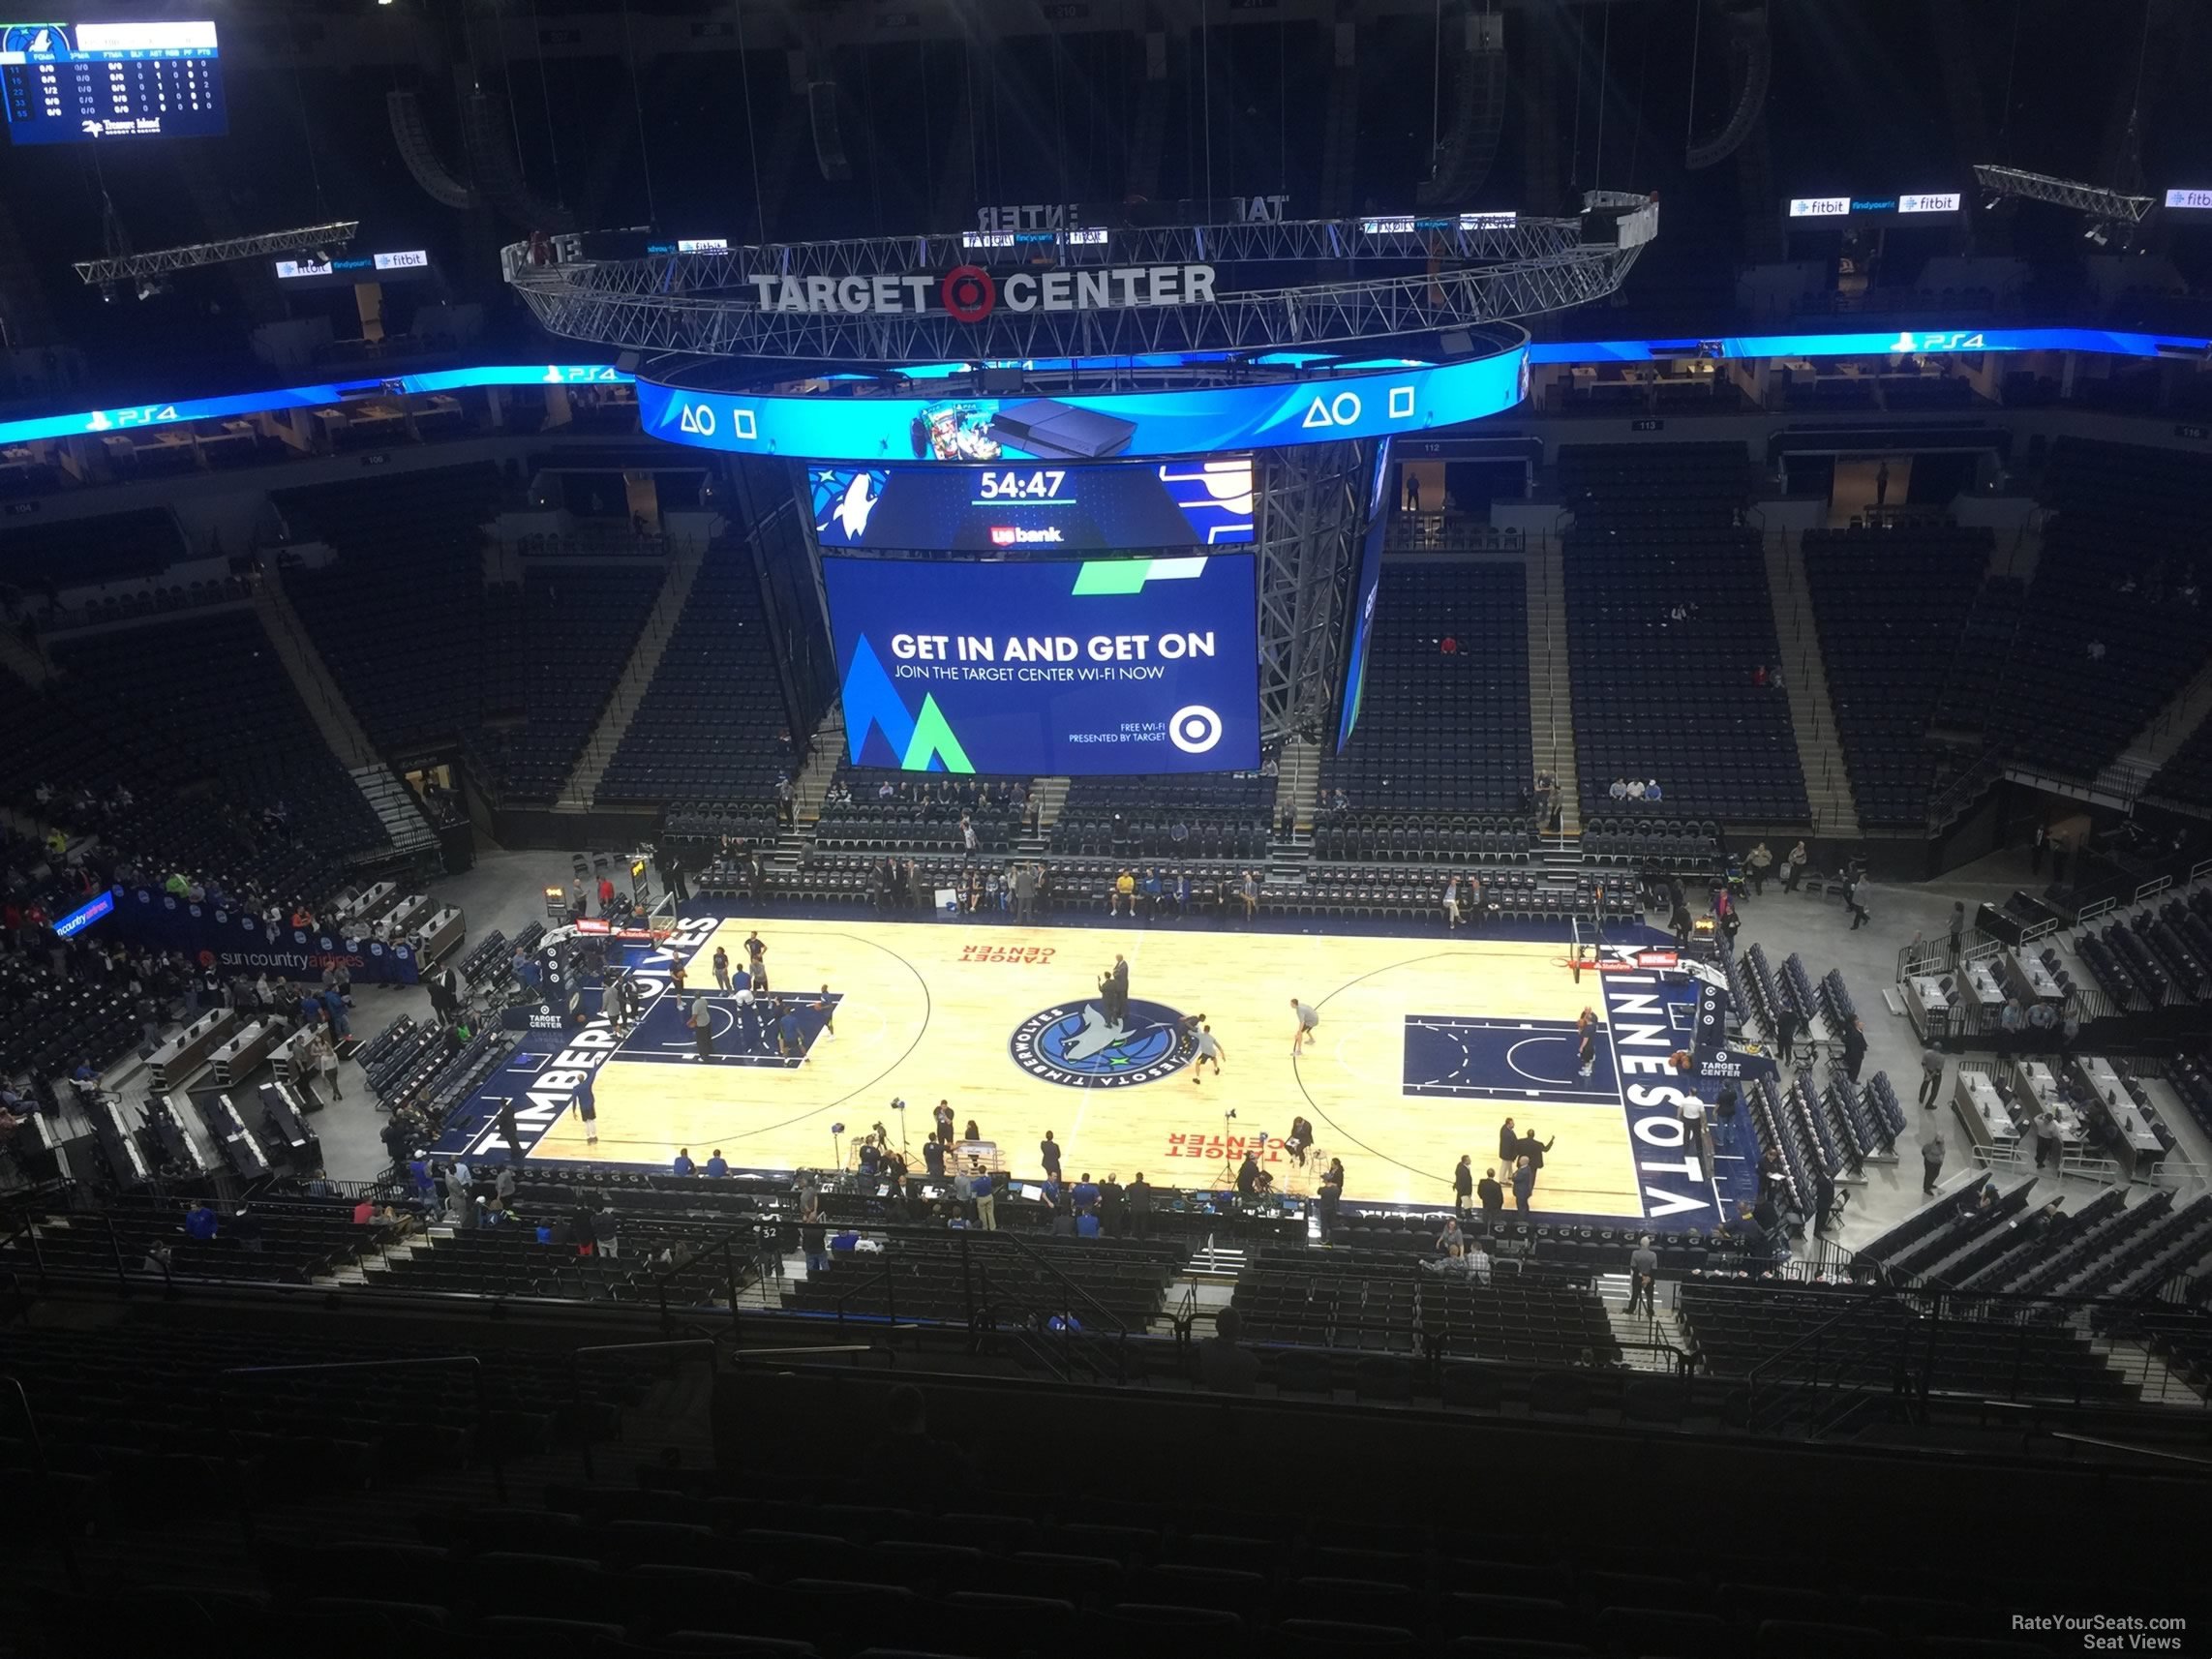 section 230, row t seat view  for basketball - target center